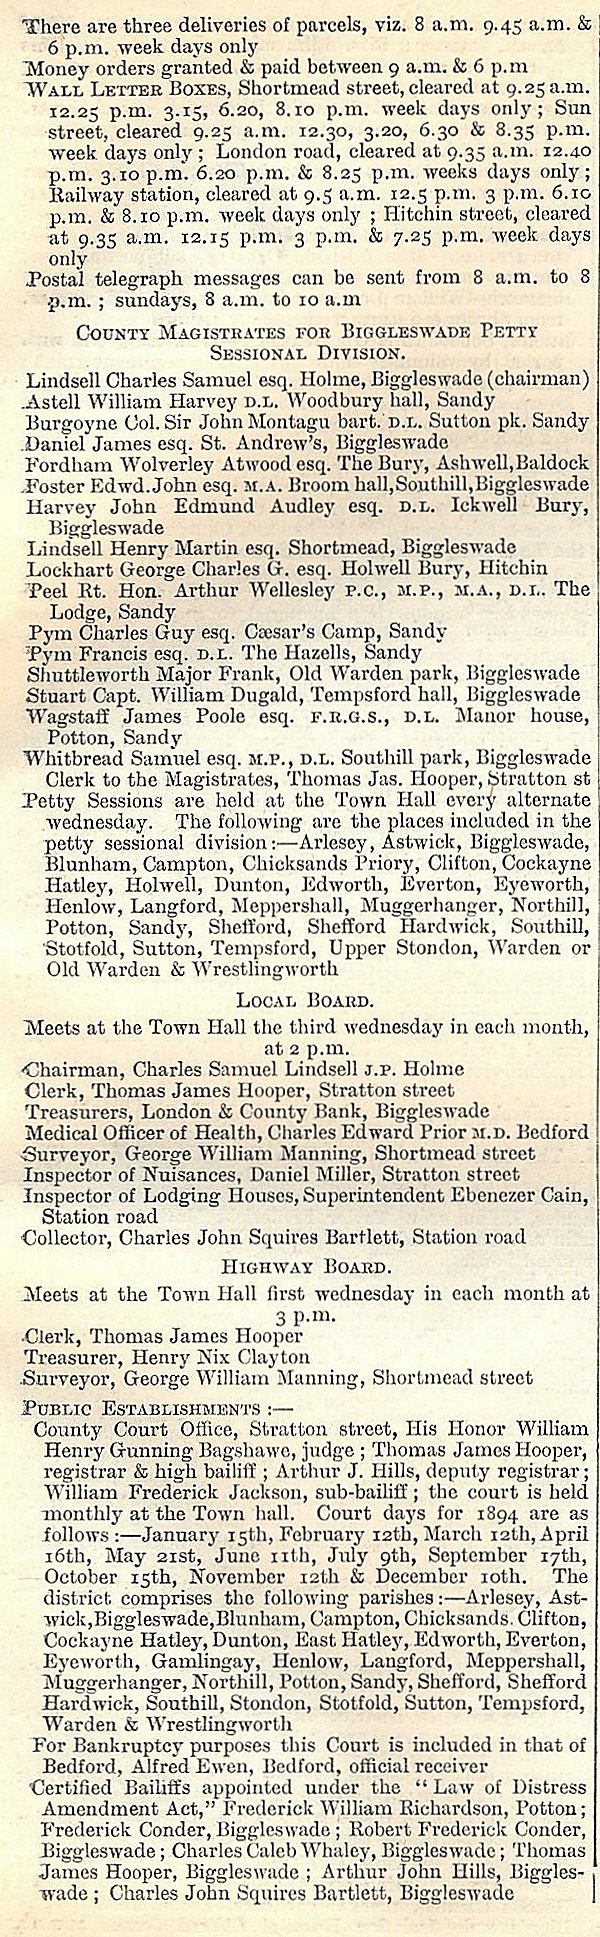 Biggleswade, from Kellys Directory 1894, page 49, enlarged text